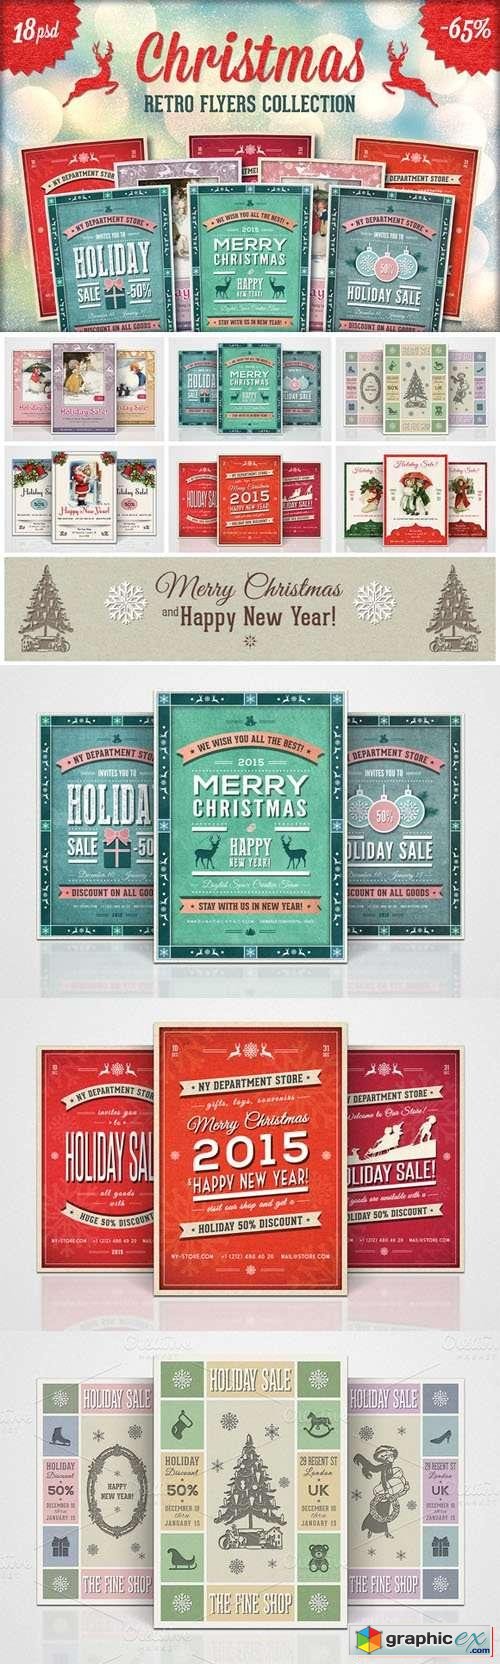 18 Retro Christmas Flyers Collection